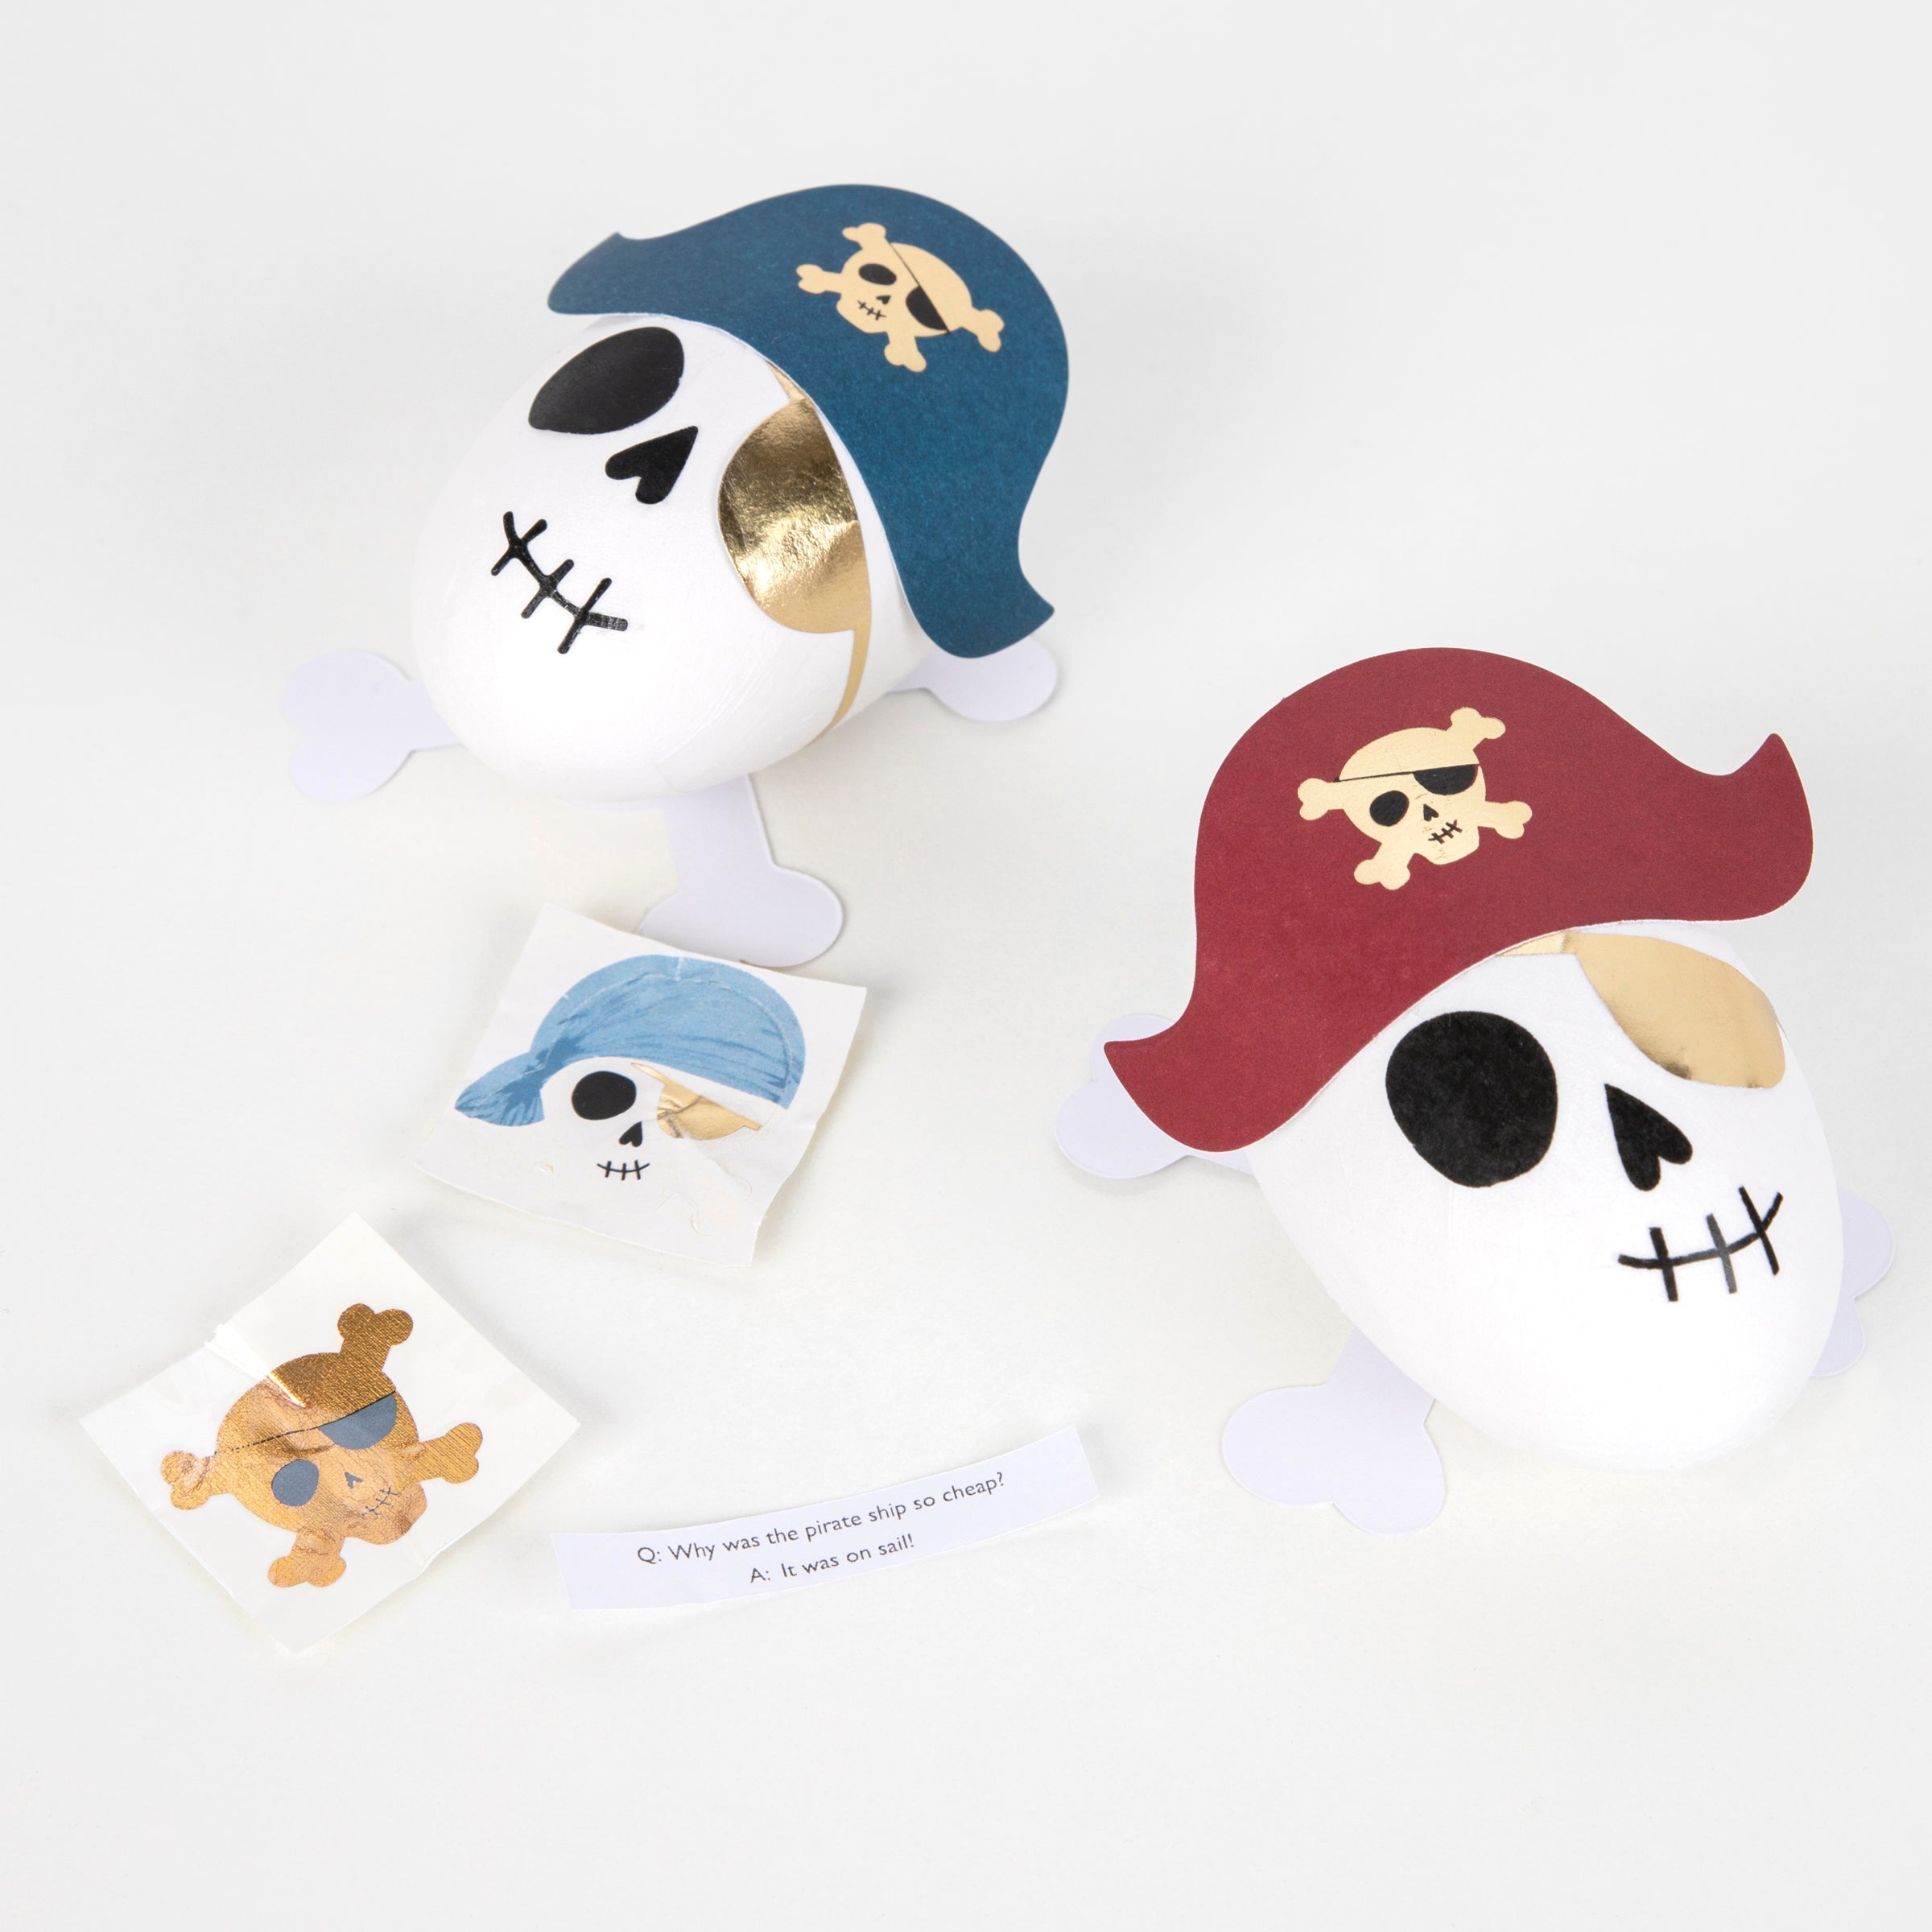 Make your pirate party look amazing with our pirate decorations filled with pirate gifts.